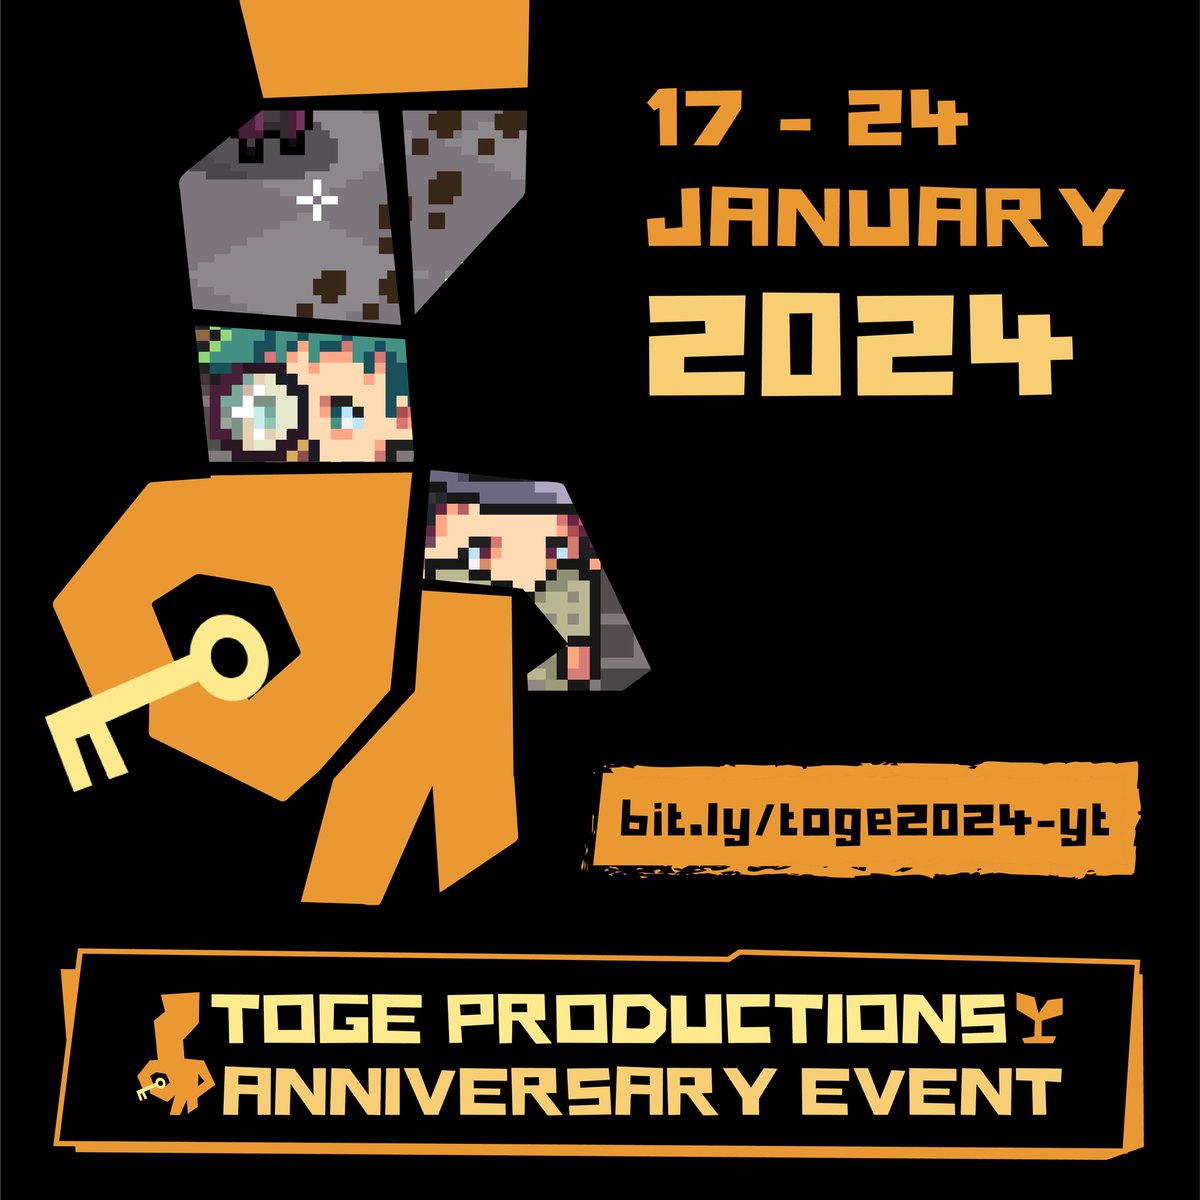 TOGE PRODUCTIONS ANNIVERSARY EVENT bit.ly/toge2024-yt 17.01.2024 10 AM PST / 18.01.2024 1 AM WIB